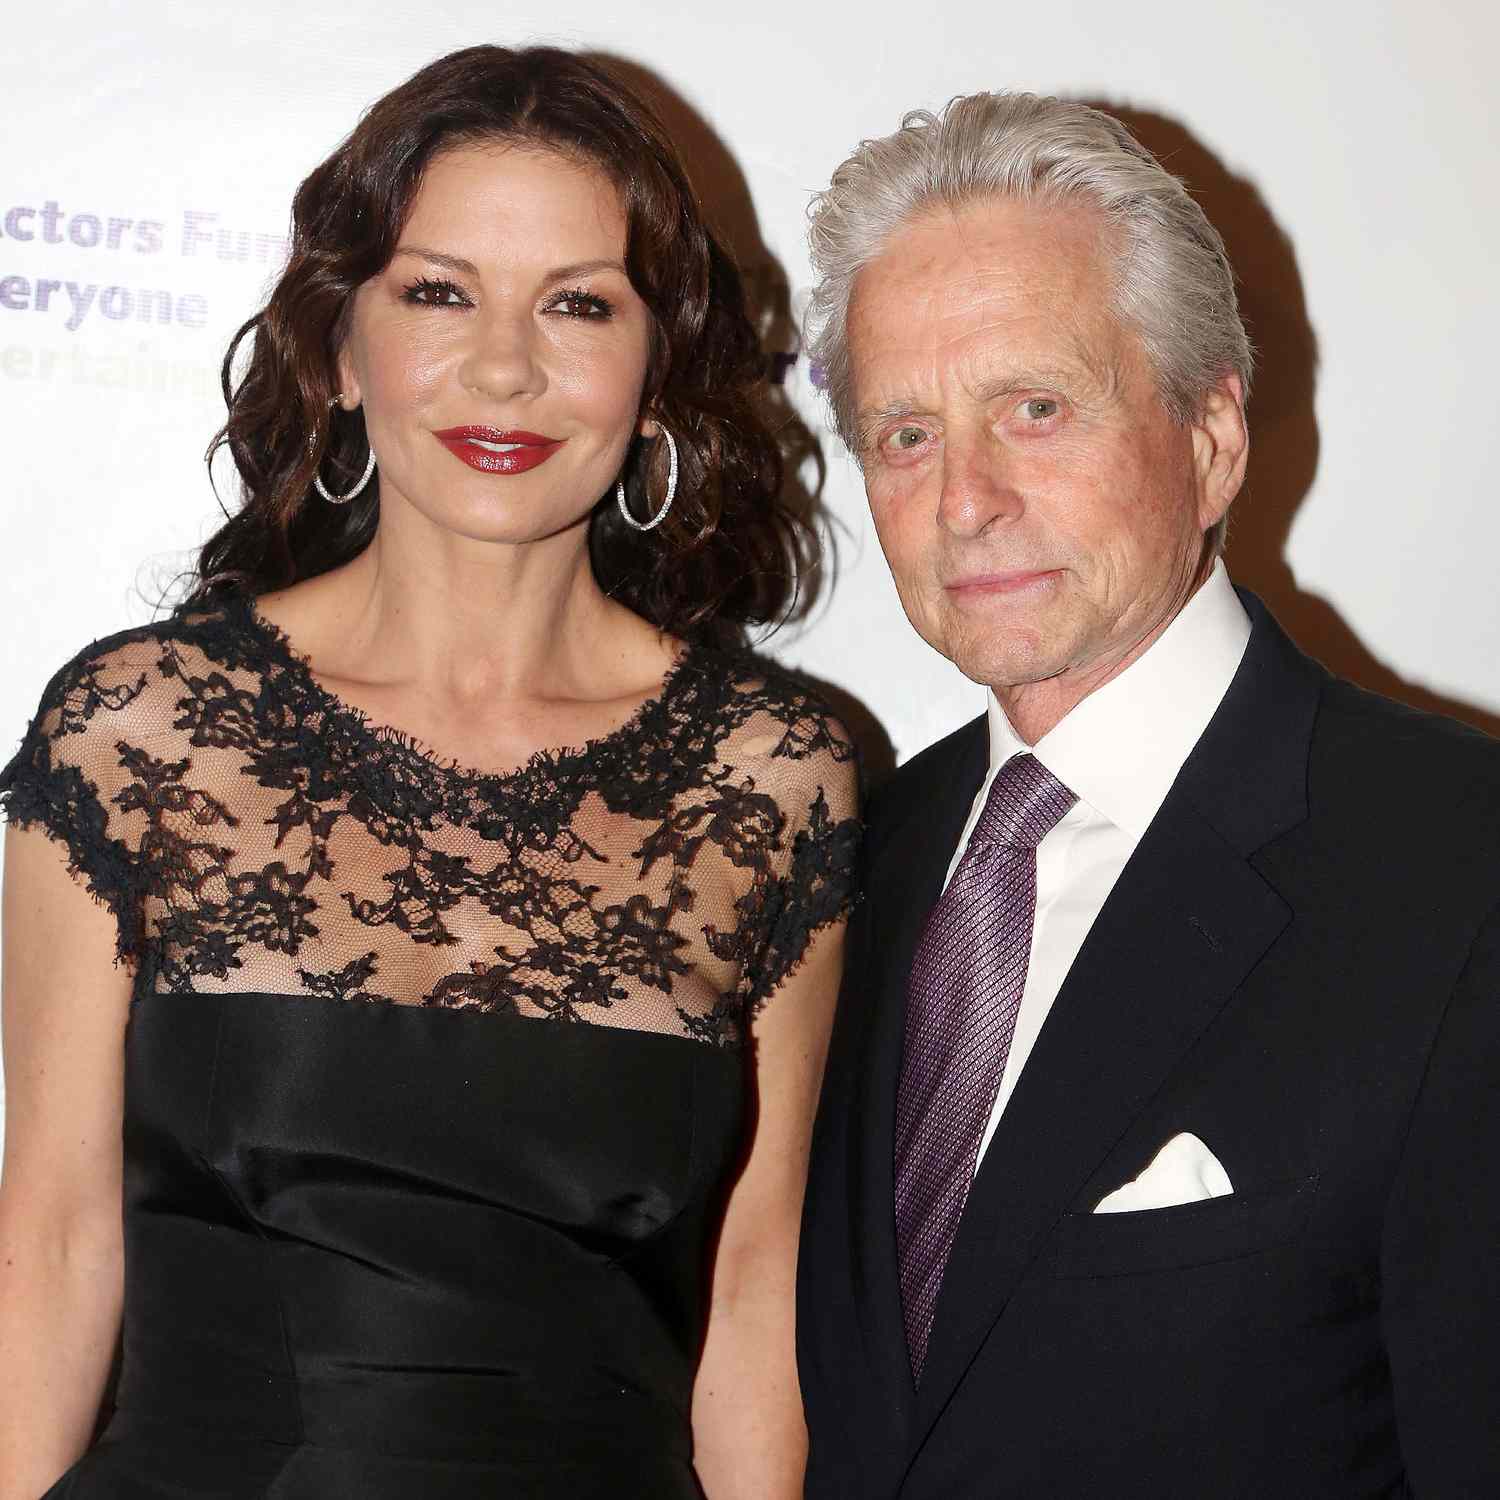 Michael Douglas Talks Life, Aging and His 'Good Marriage' | PEOPLE.com